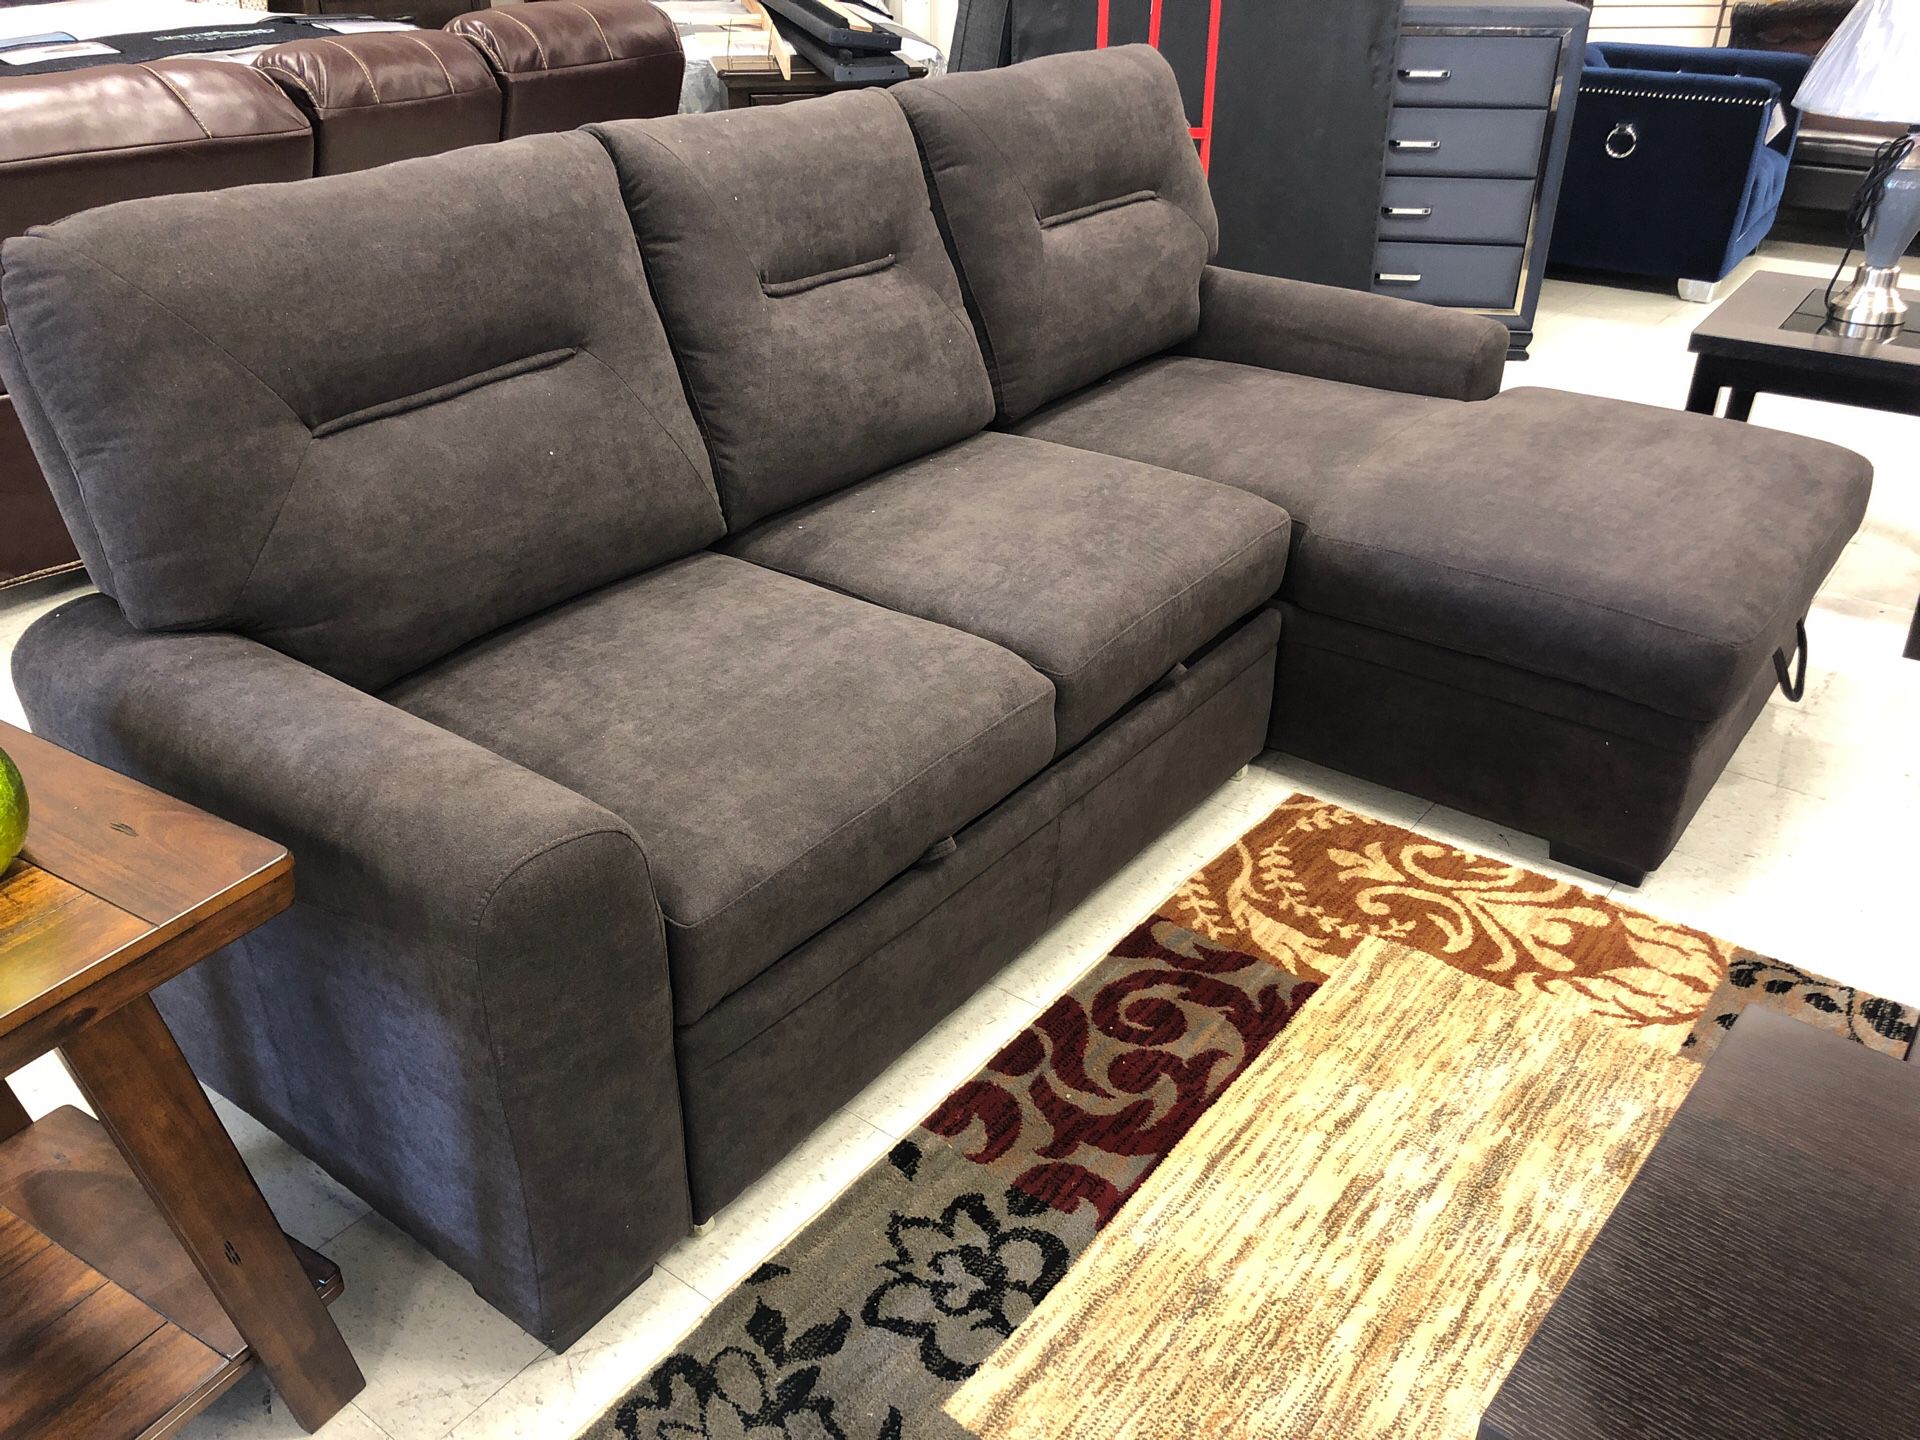 Huge furniture market sale up to 80% off display items in store only